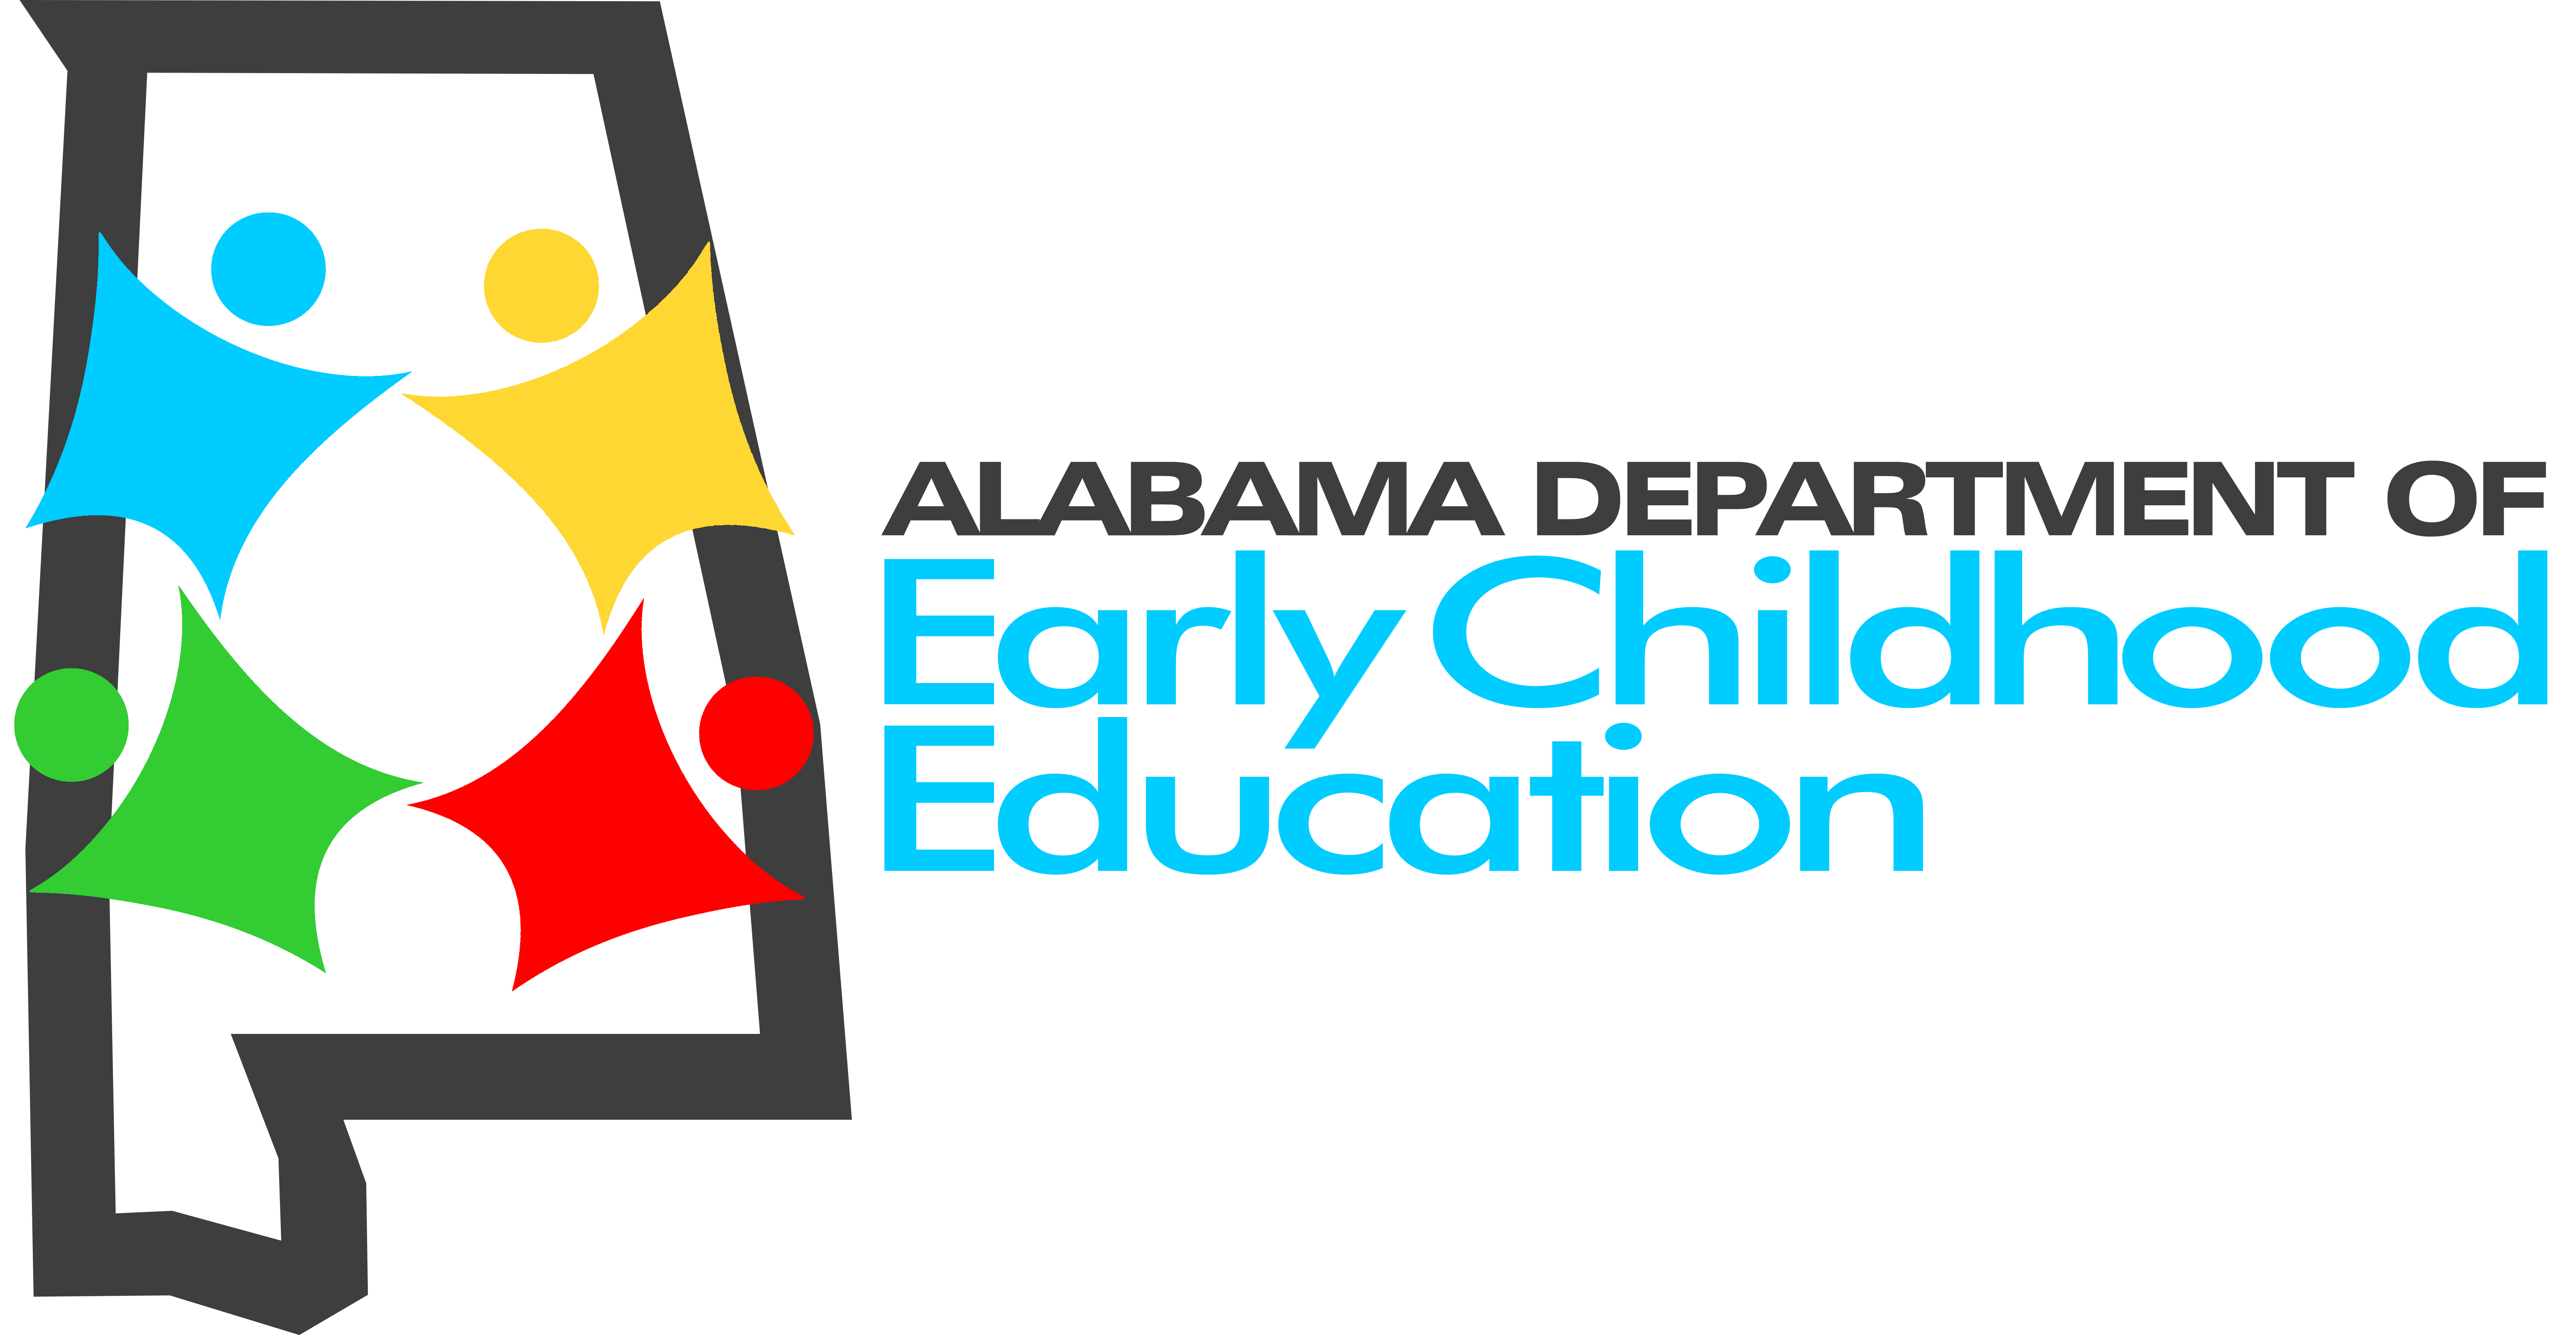 Alabama Department of Early Childhood Education 